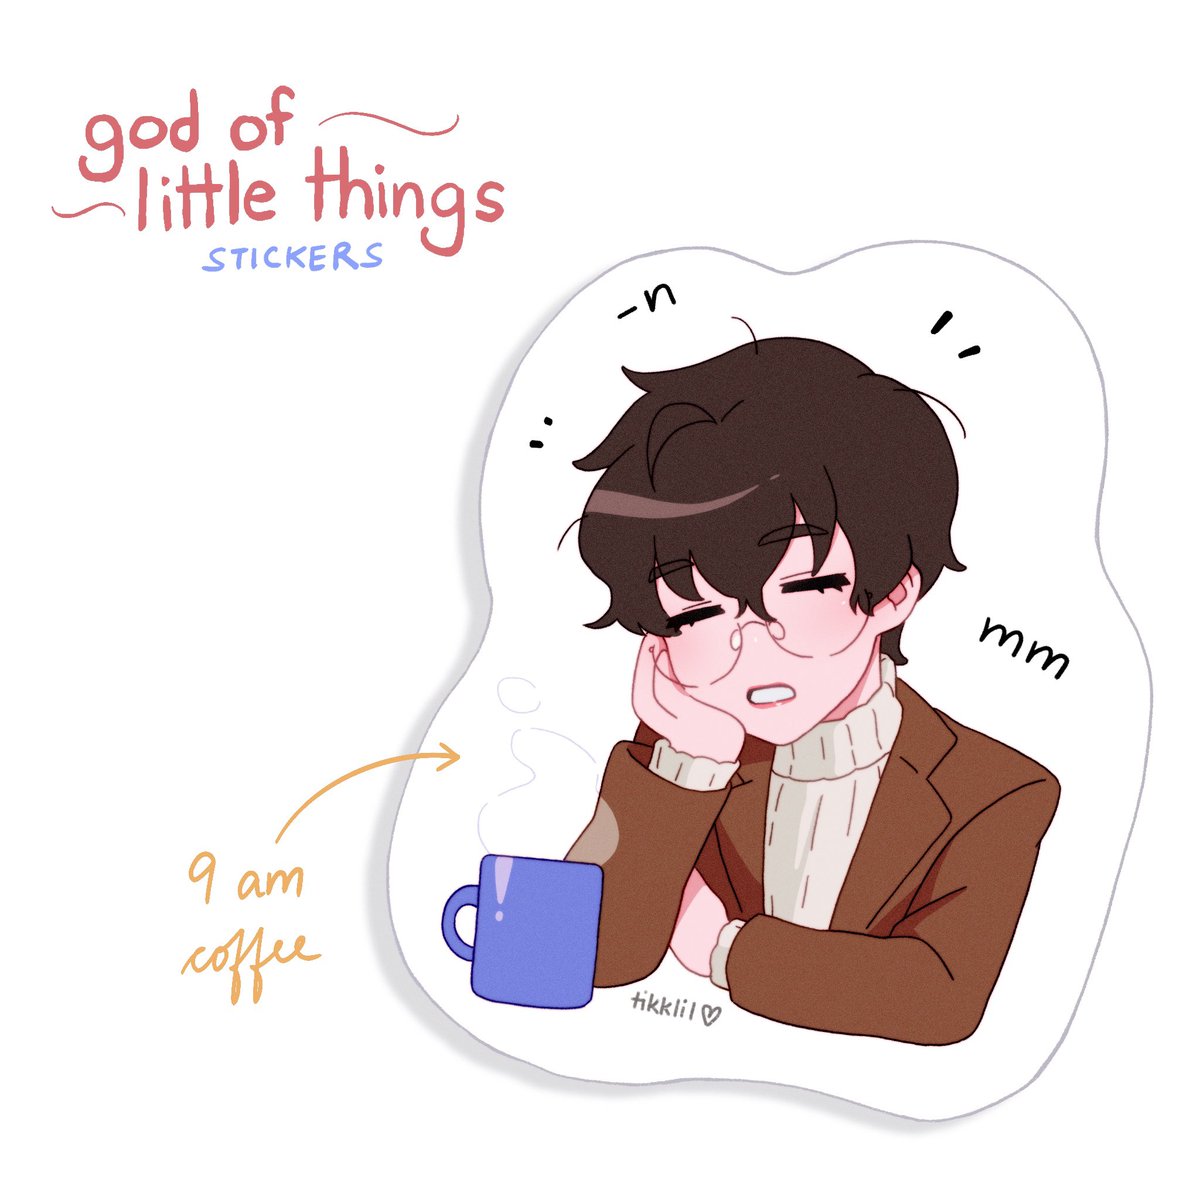 🤍Heads up about my sticker store🤍
I'm going to be deactivating my teespr!ng account in a week bcs of some logistical issues.
This is the last time you can order GOLT stickers, so here's the link if you want to get some last minute merch! ✨
Check 🧵
https://t.co/RUNZ0Iu8J4 